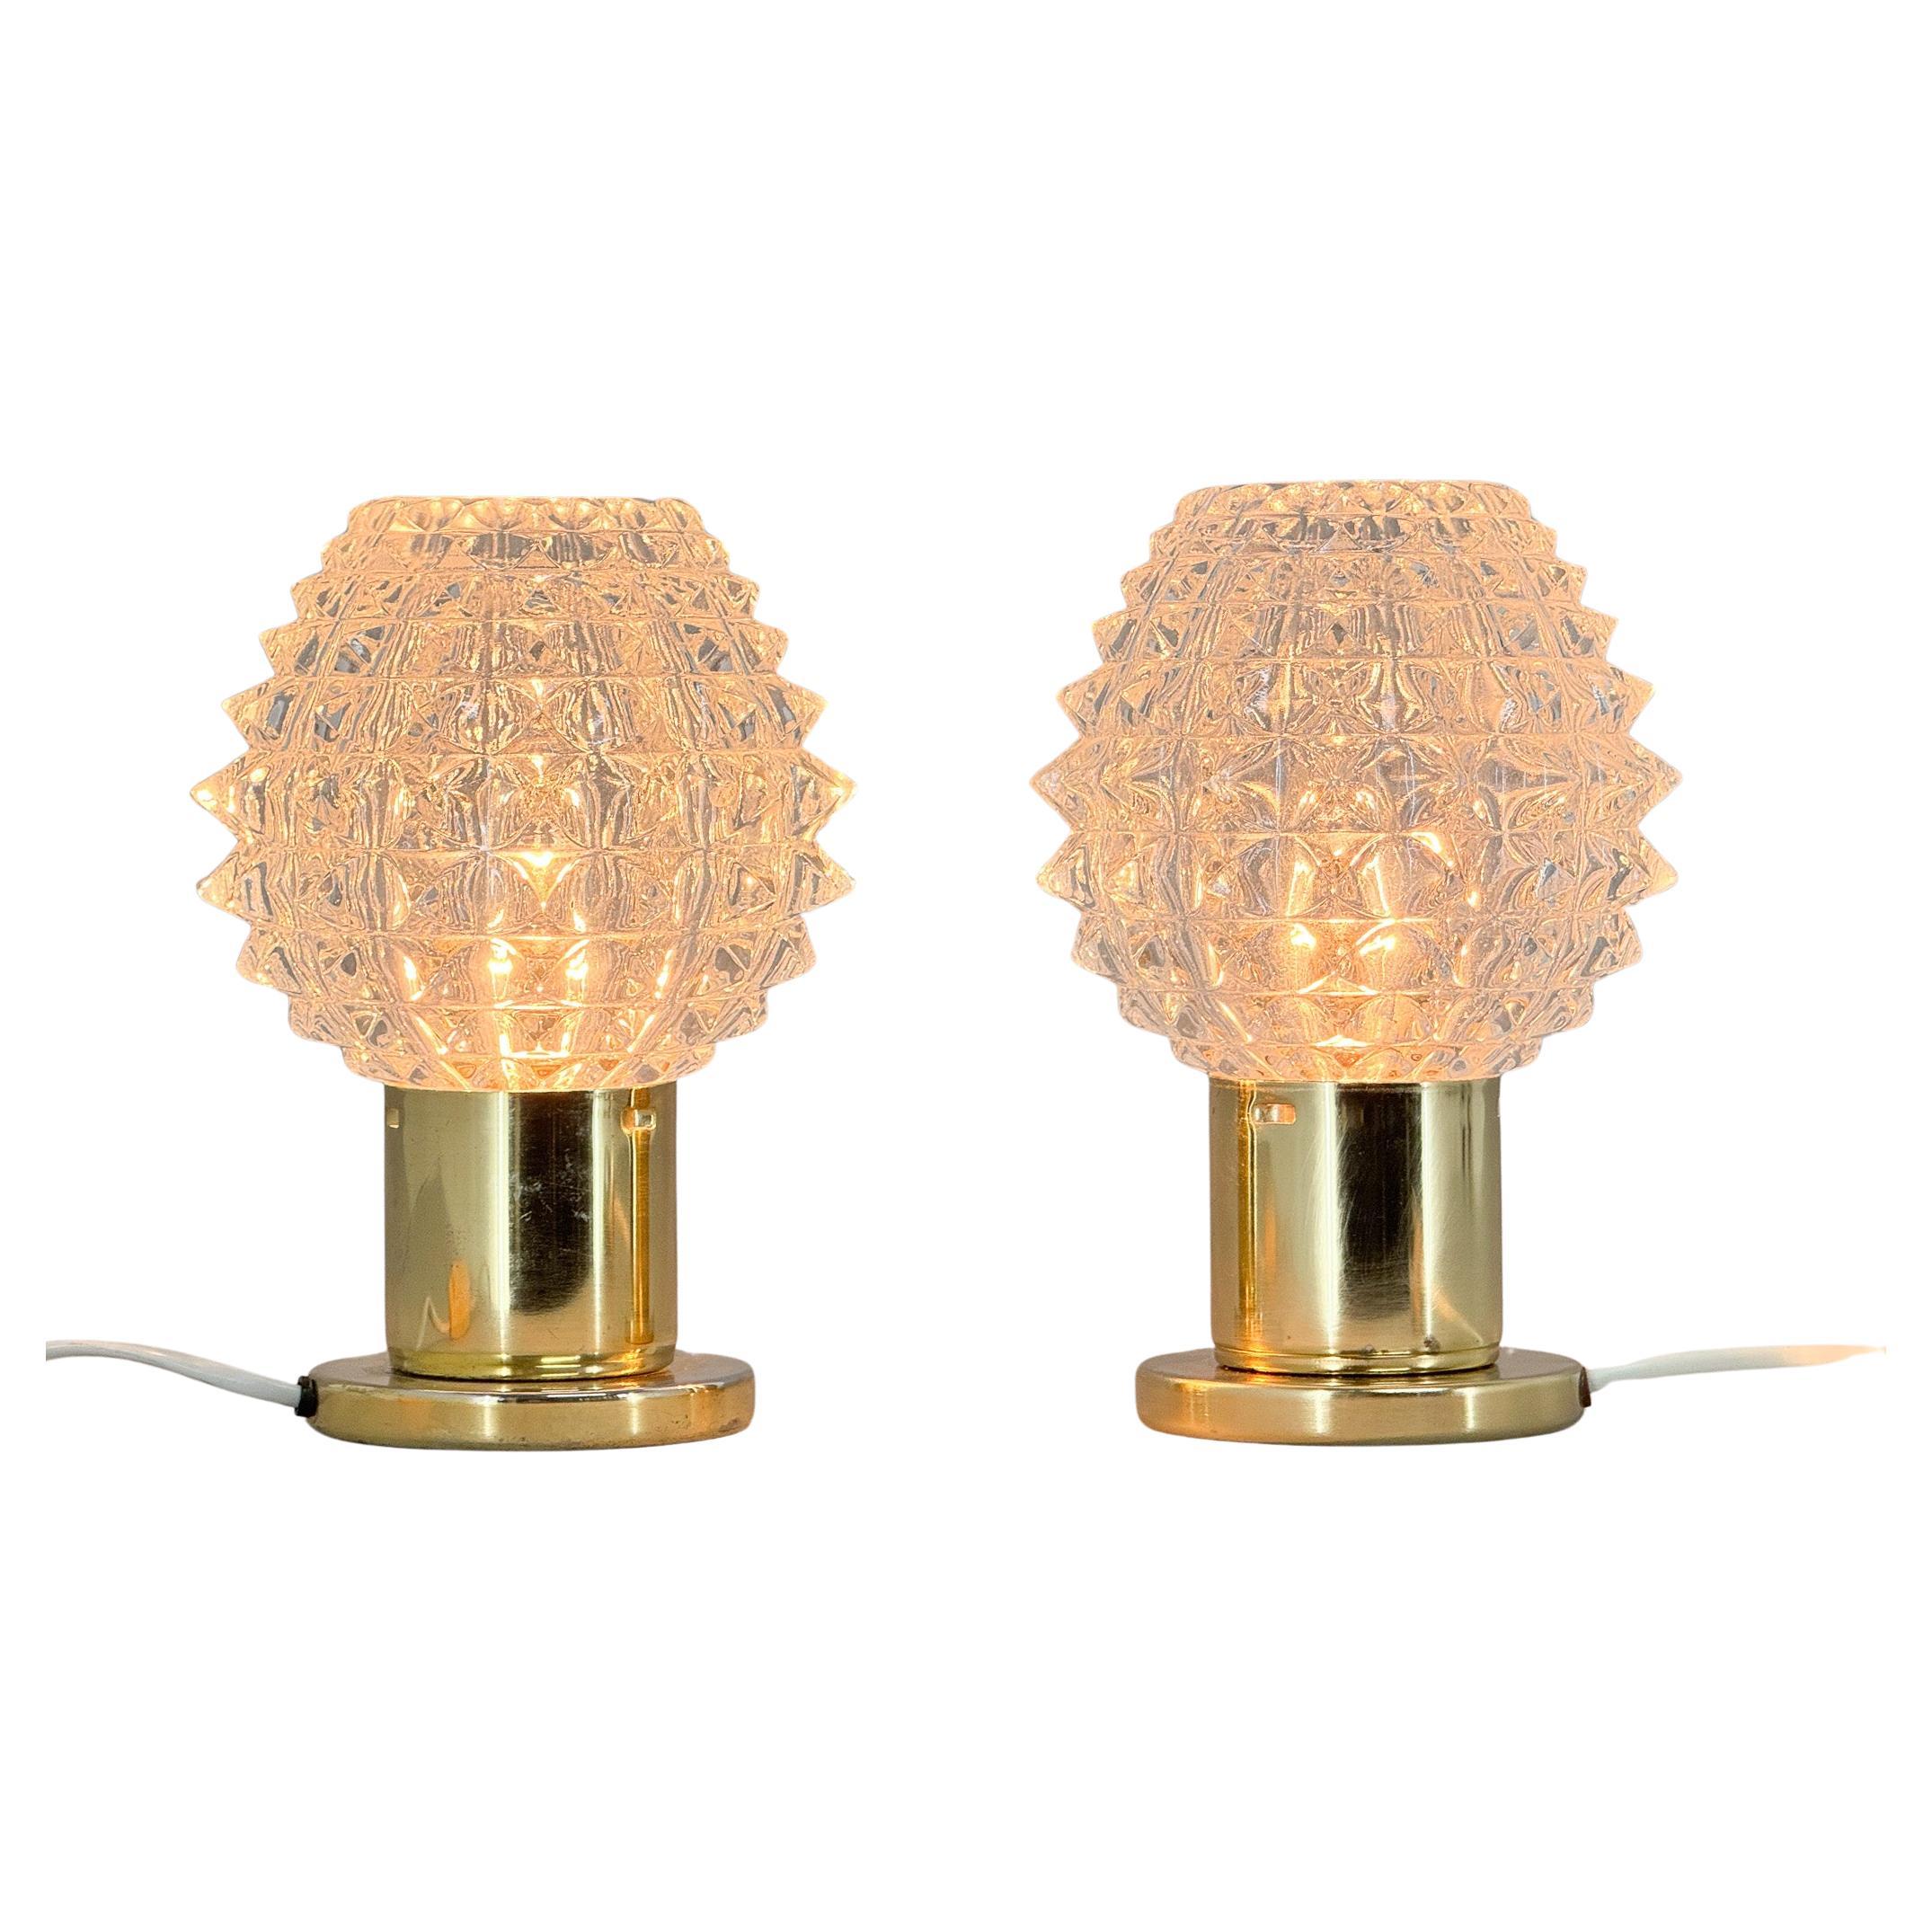 Pair of Brass and Glass Table Lamps by Kamenicky Senov, 1970s For Sale